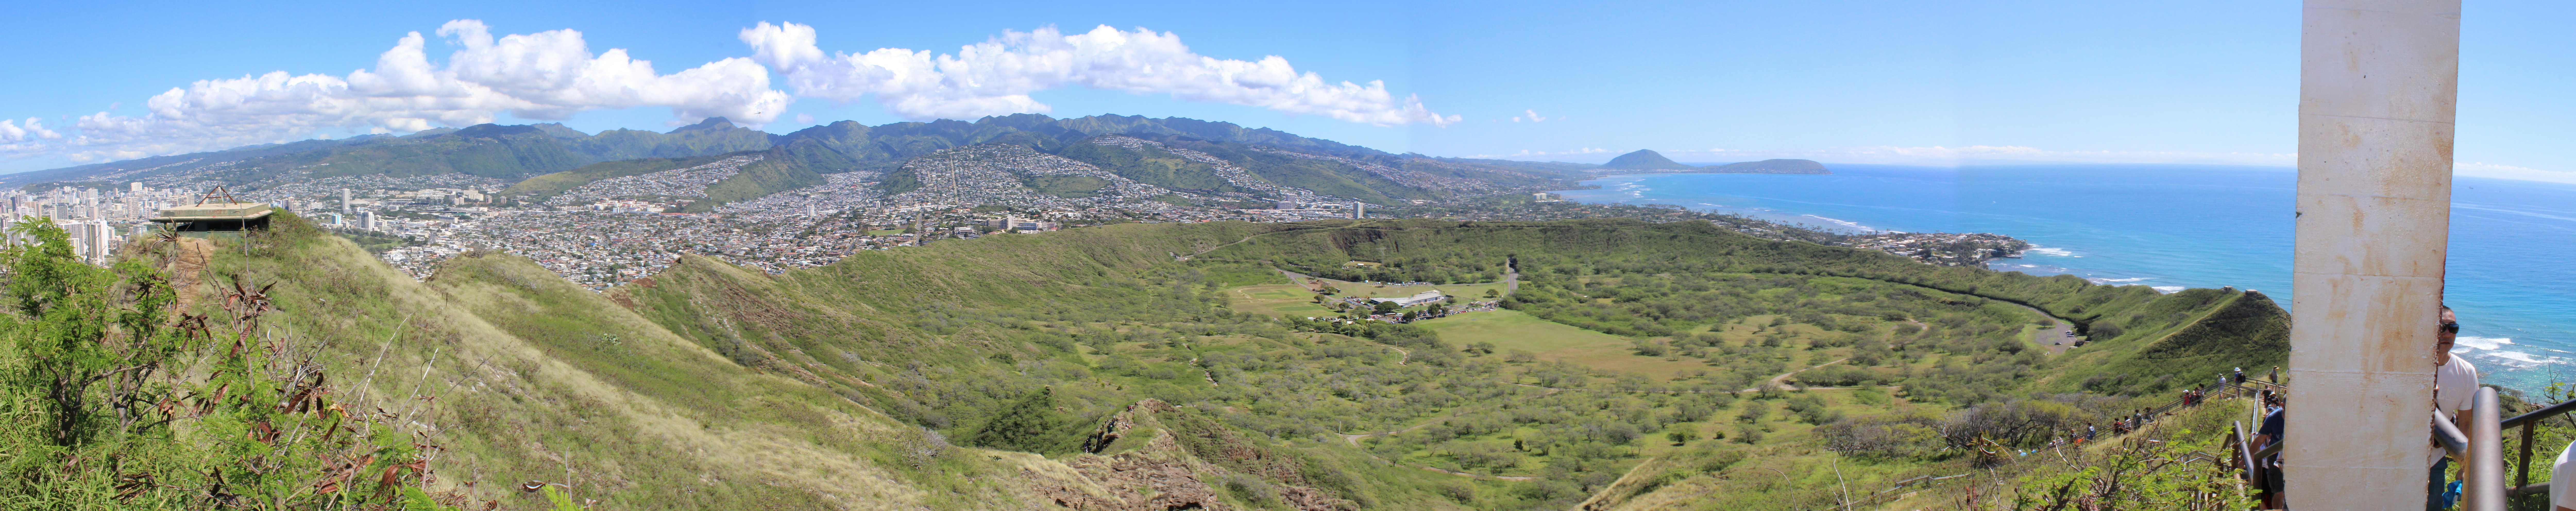 Panoramic view looking south-east from the summit of Diamond Head.